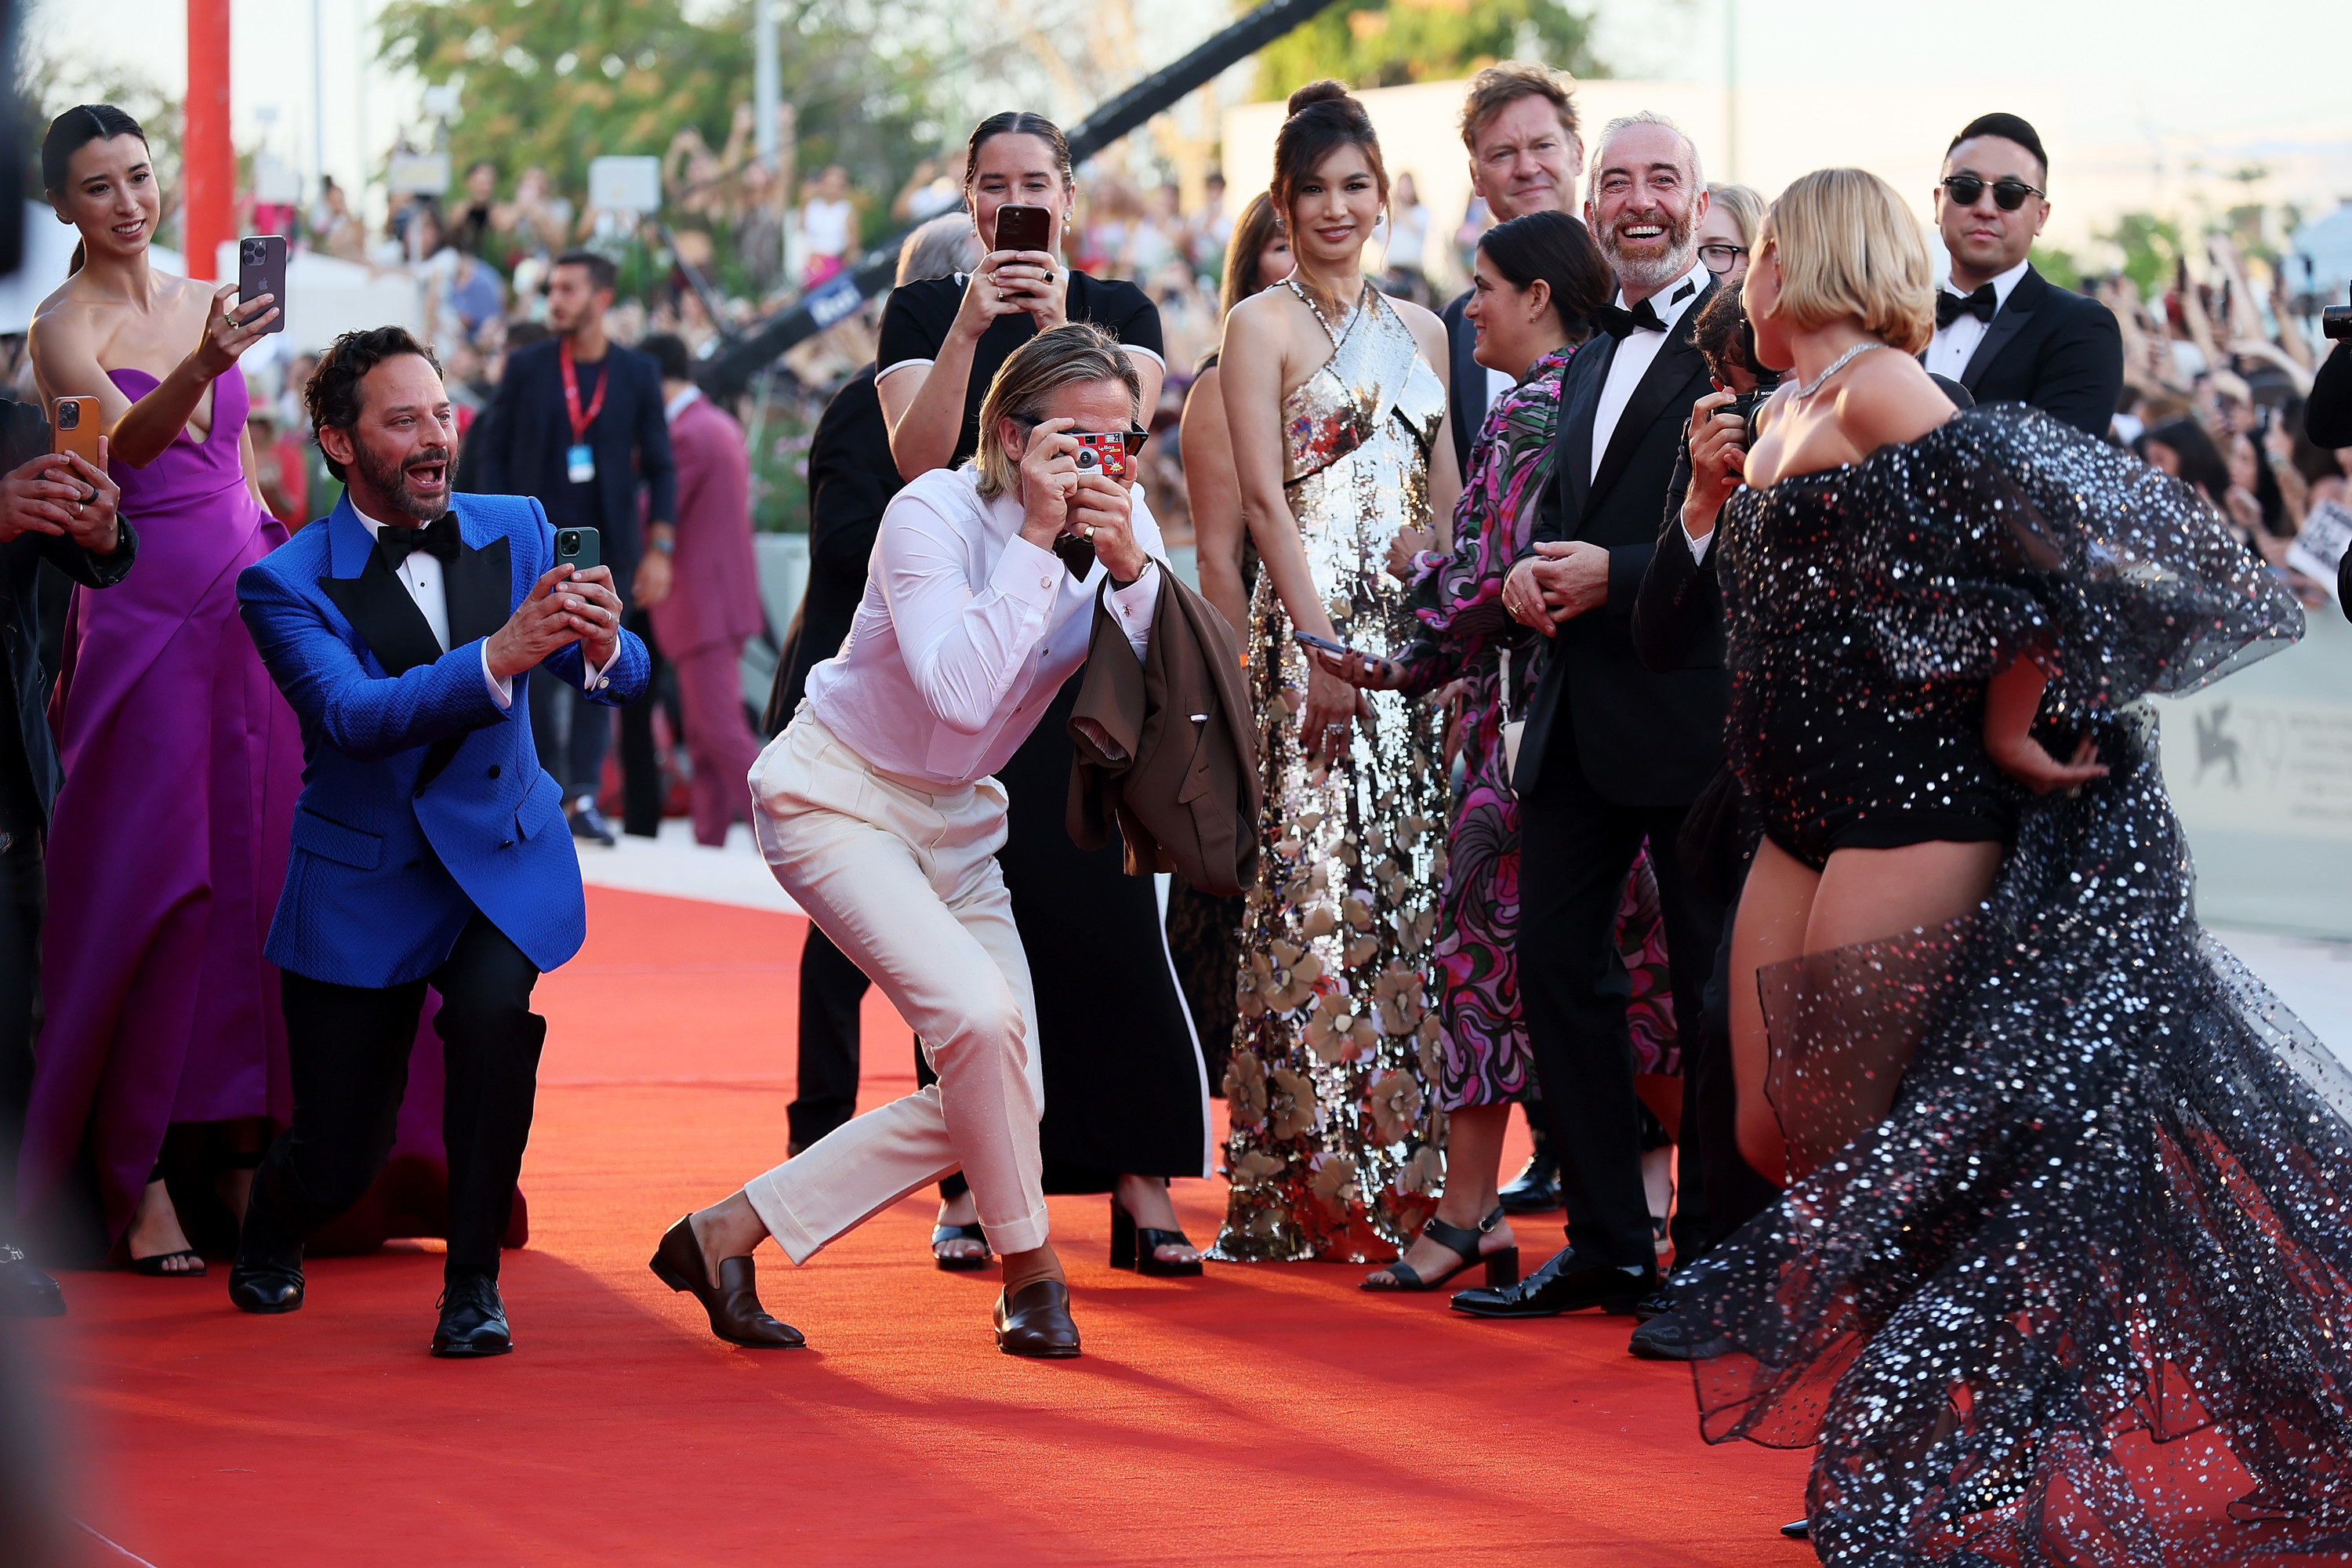 Chris and cast member Nick Kroll dramatically take photos of Florence Pugh as she poses on the red carpet